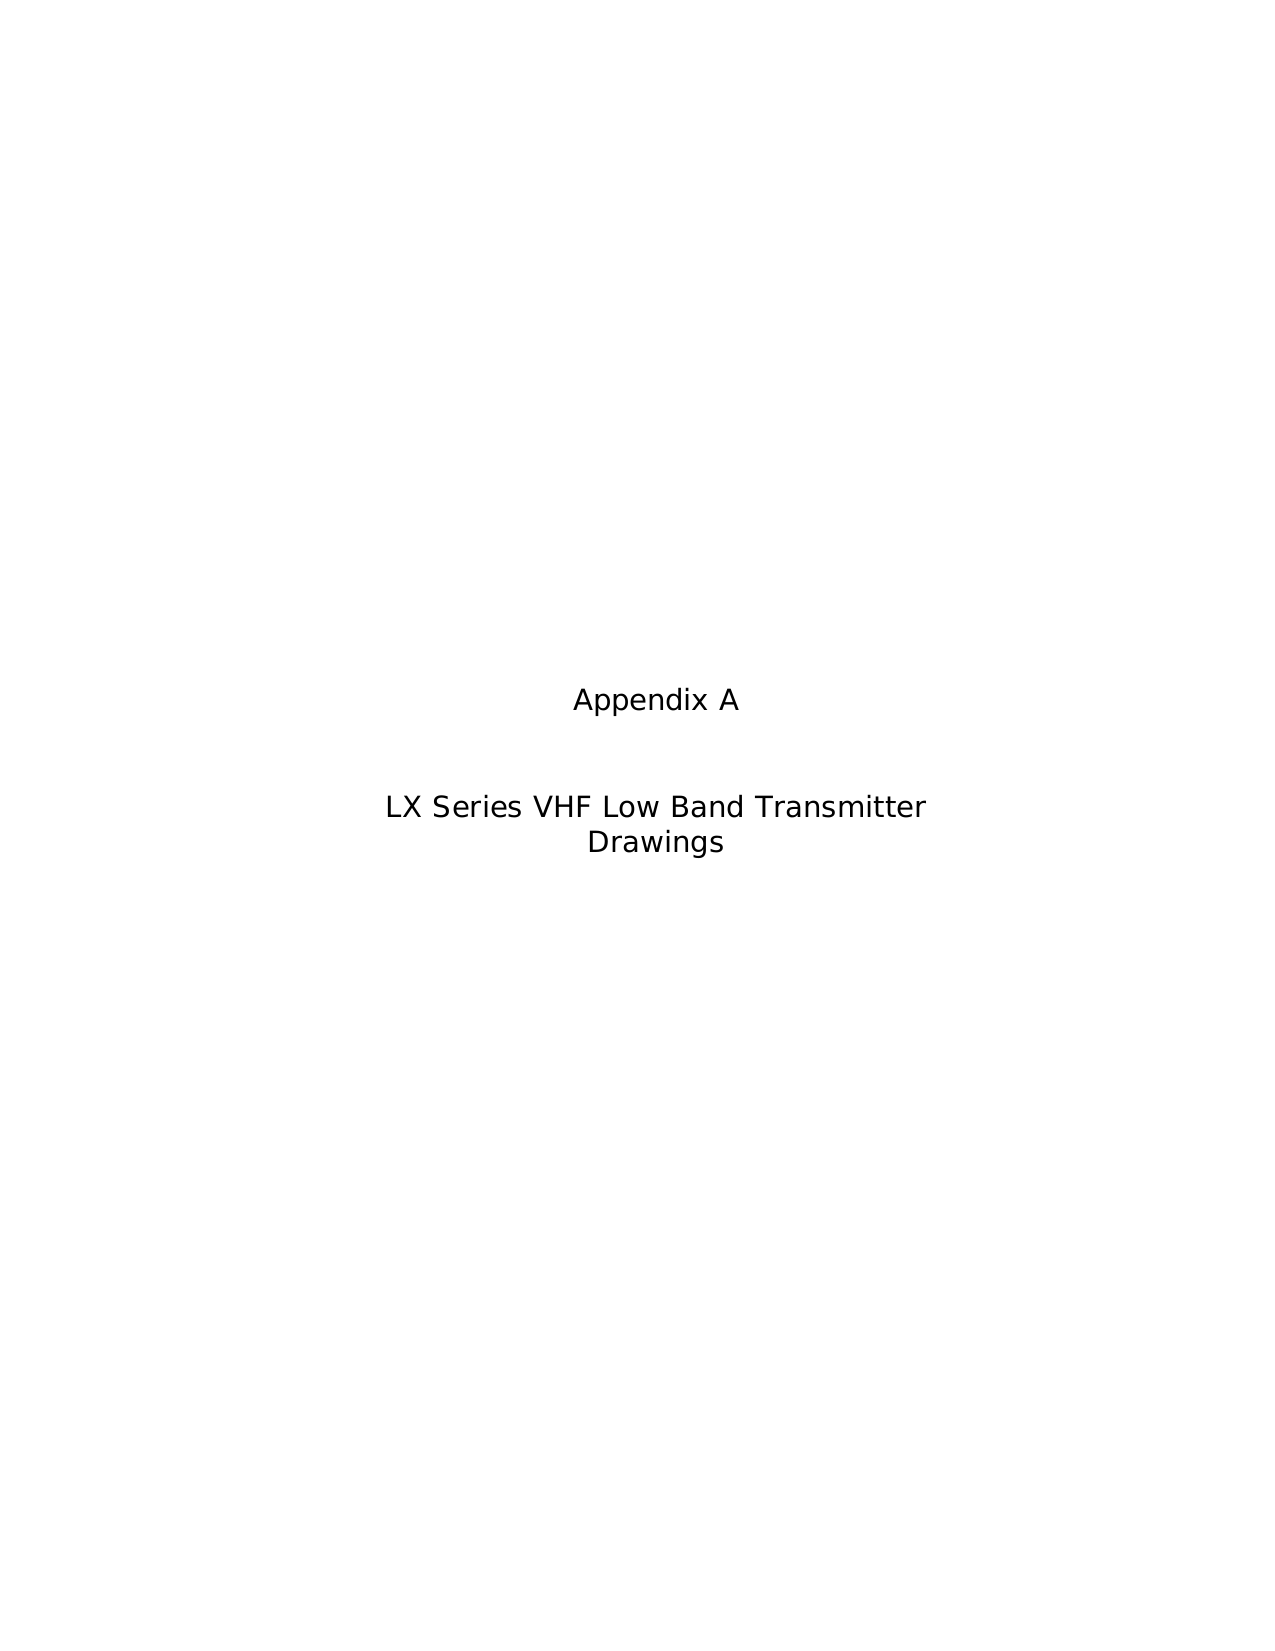                        Appendix A   LX Series VHF Low Band Transmitter Drawings  